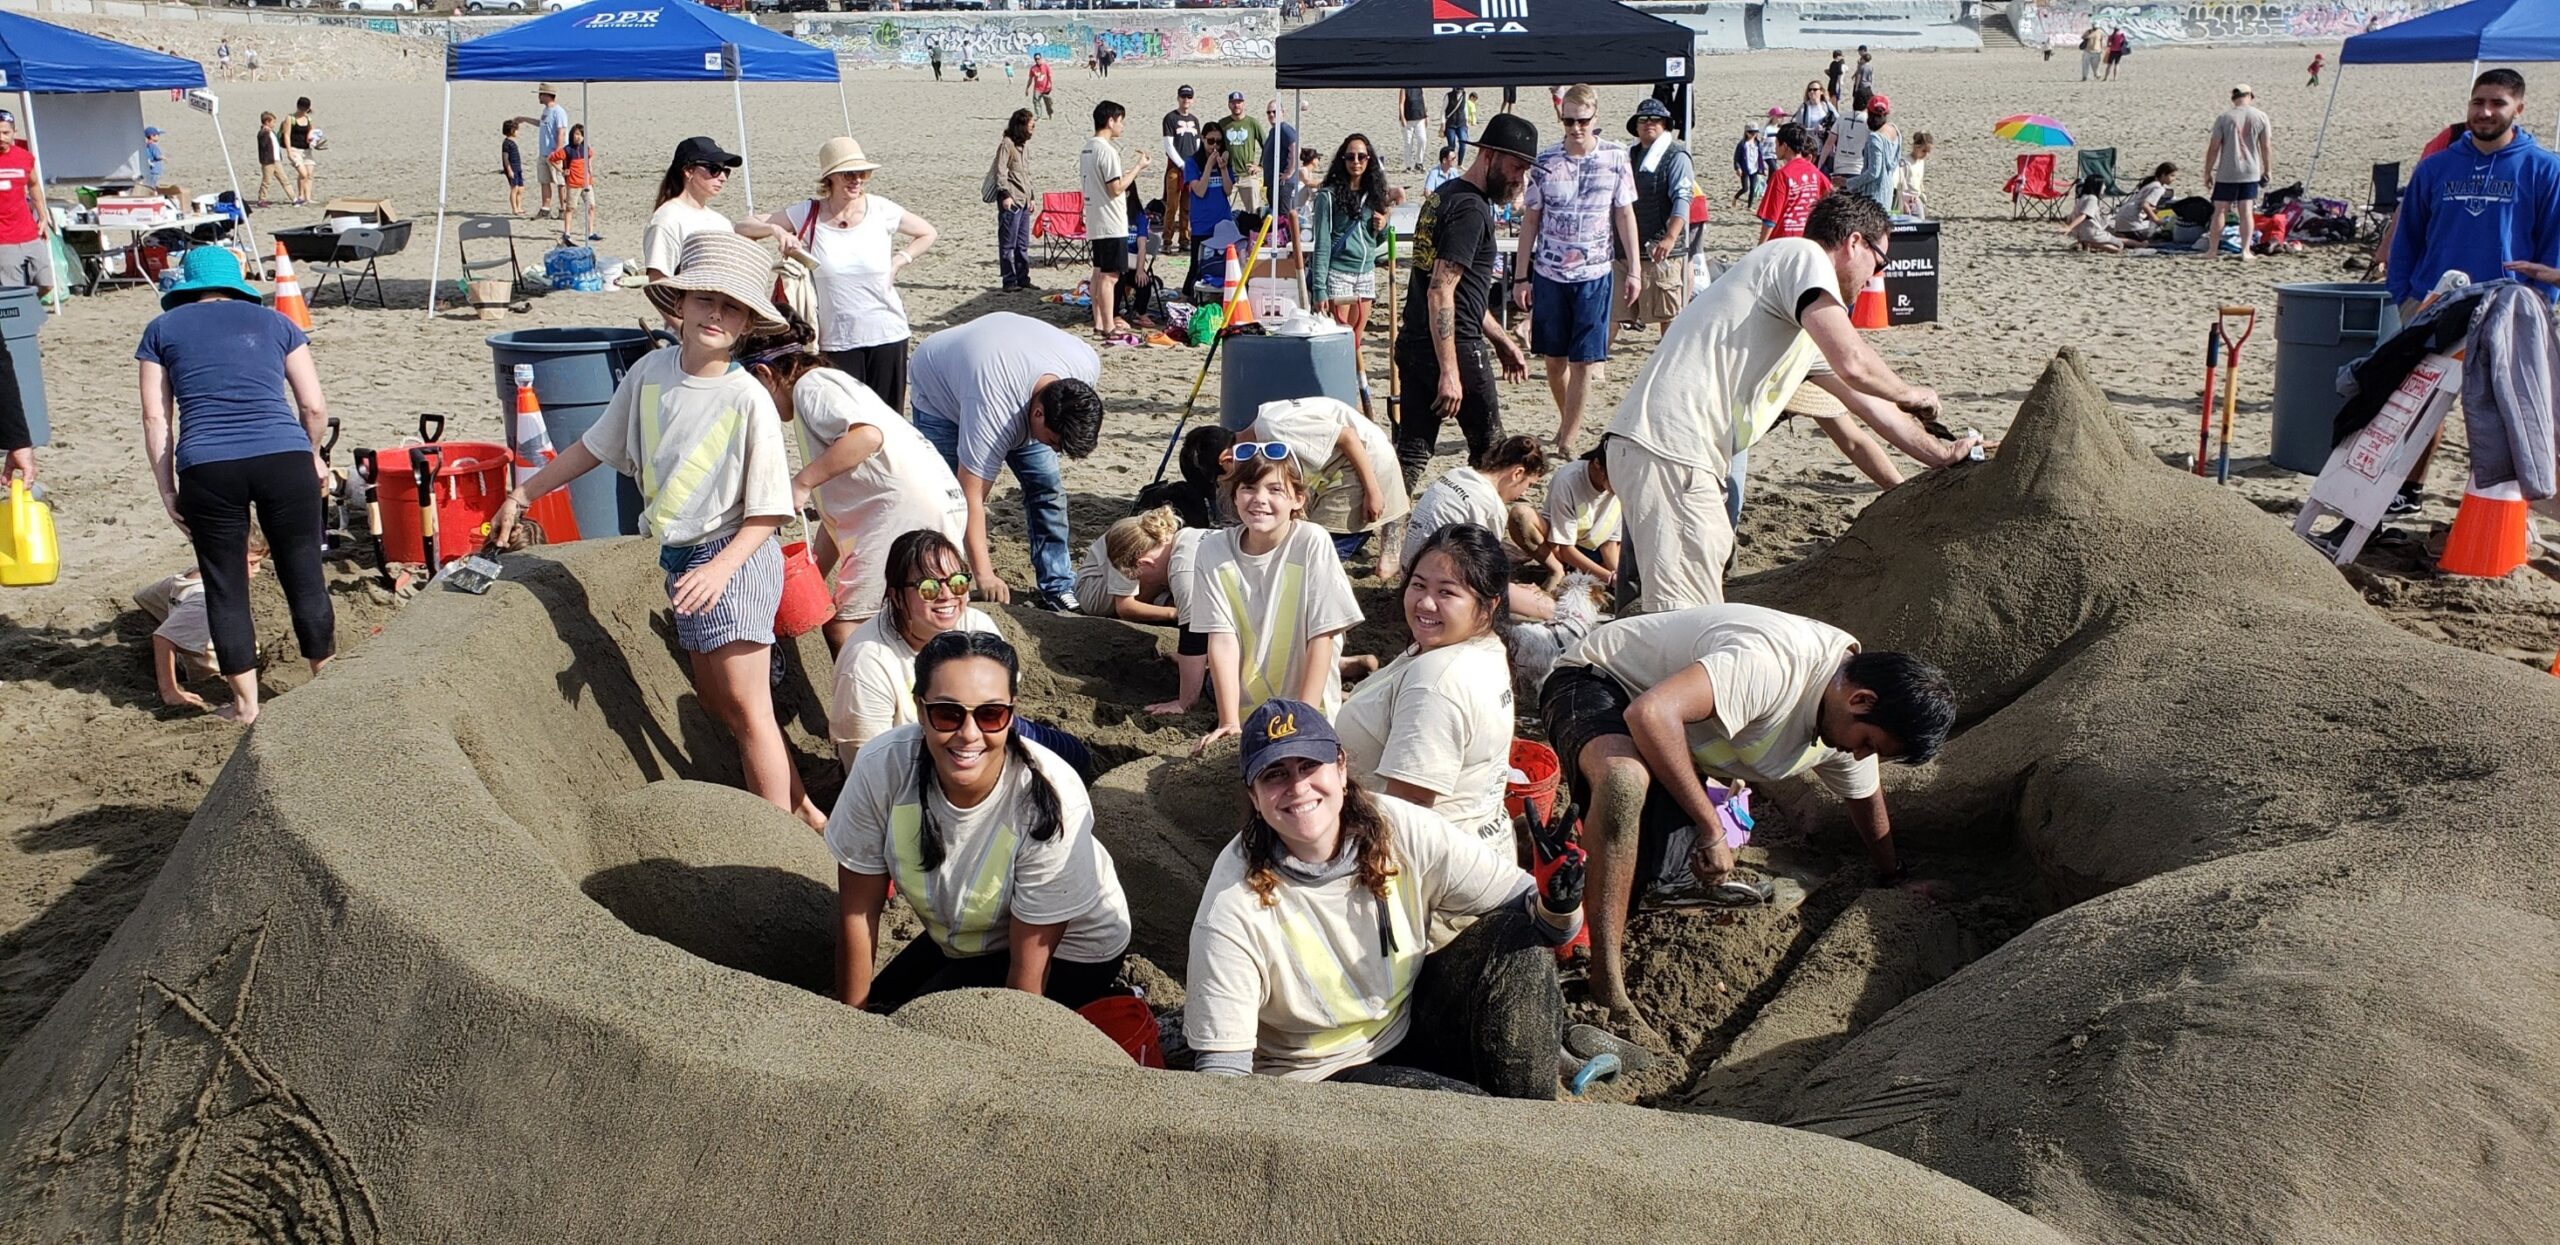 DGA group with children at sandcastle charity event